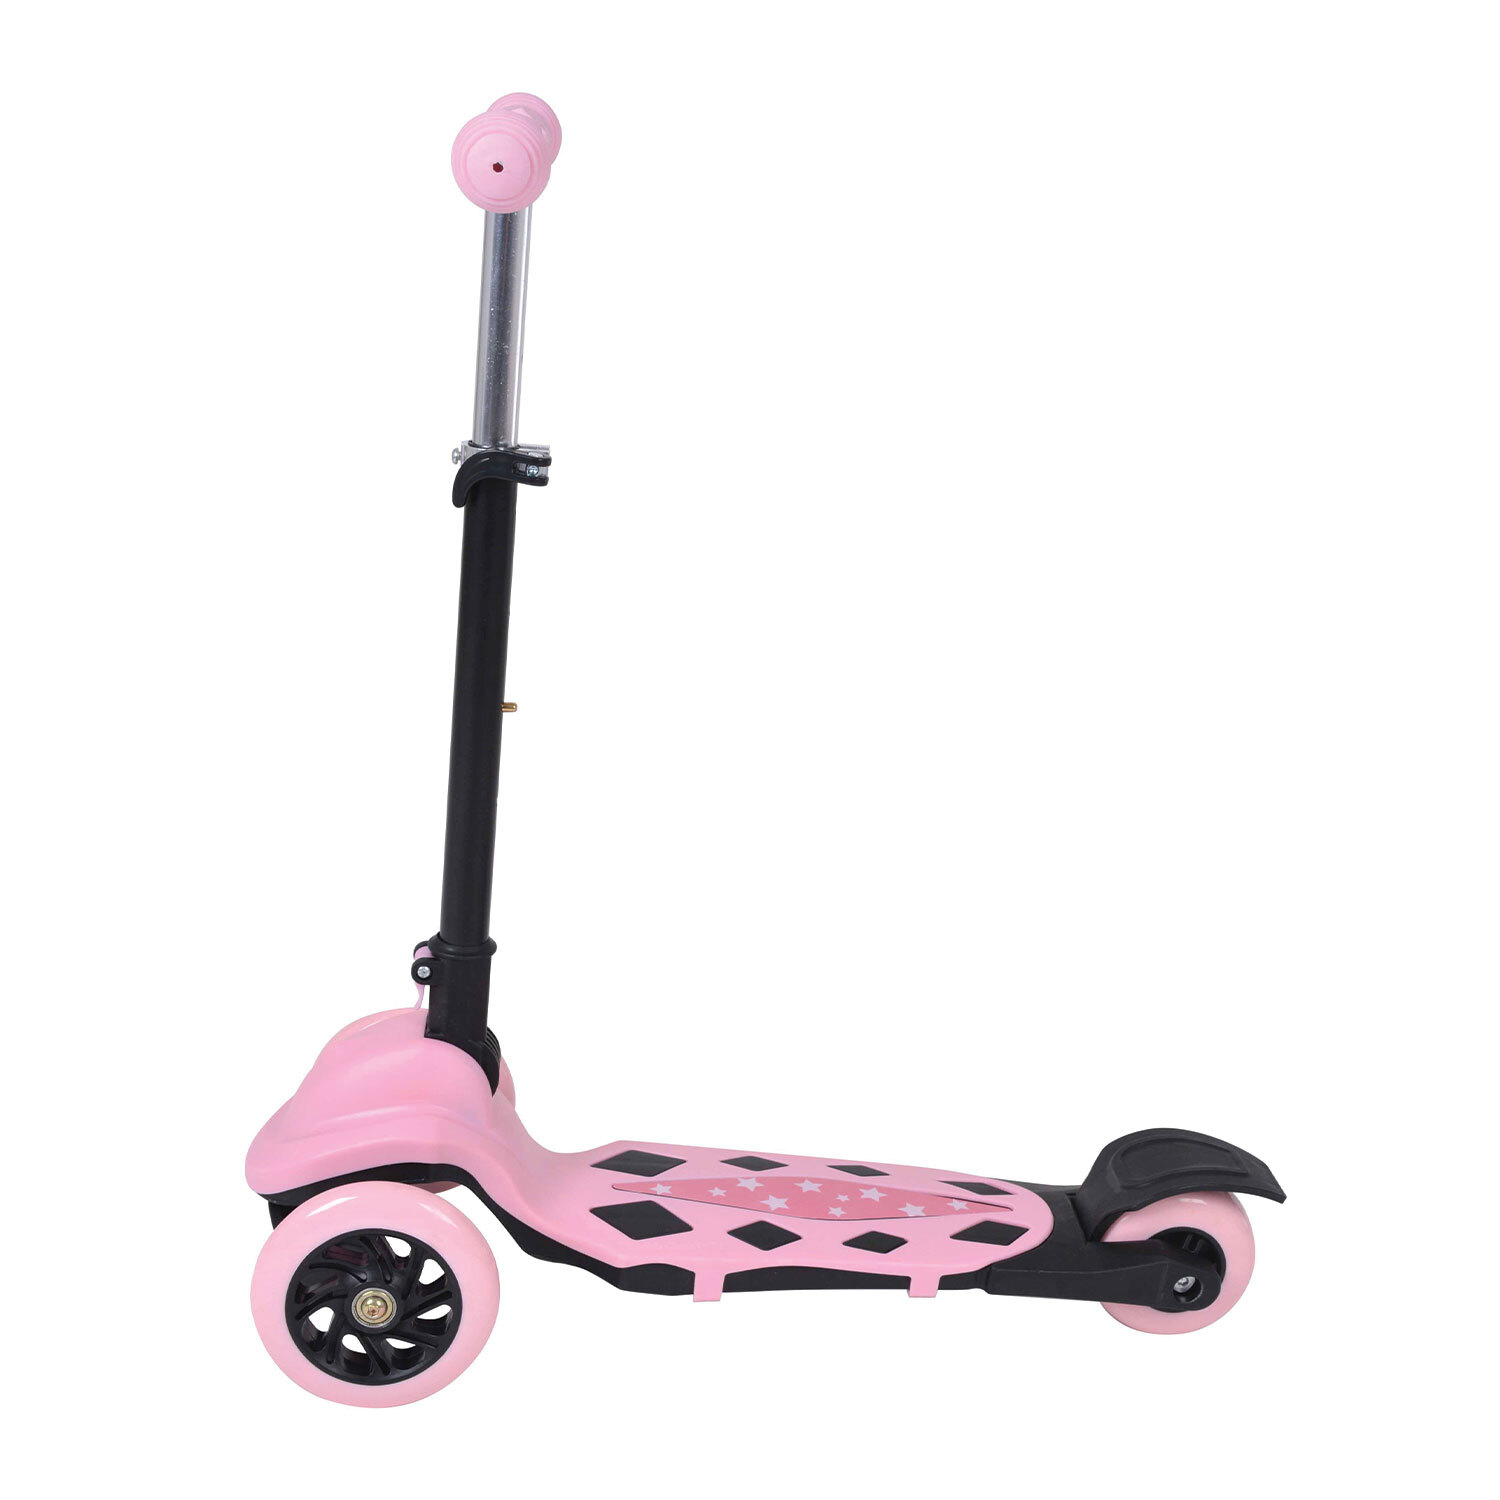 Kidz Outdoors Foldable Scooter Pink Image 3